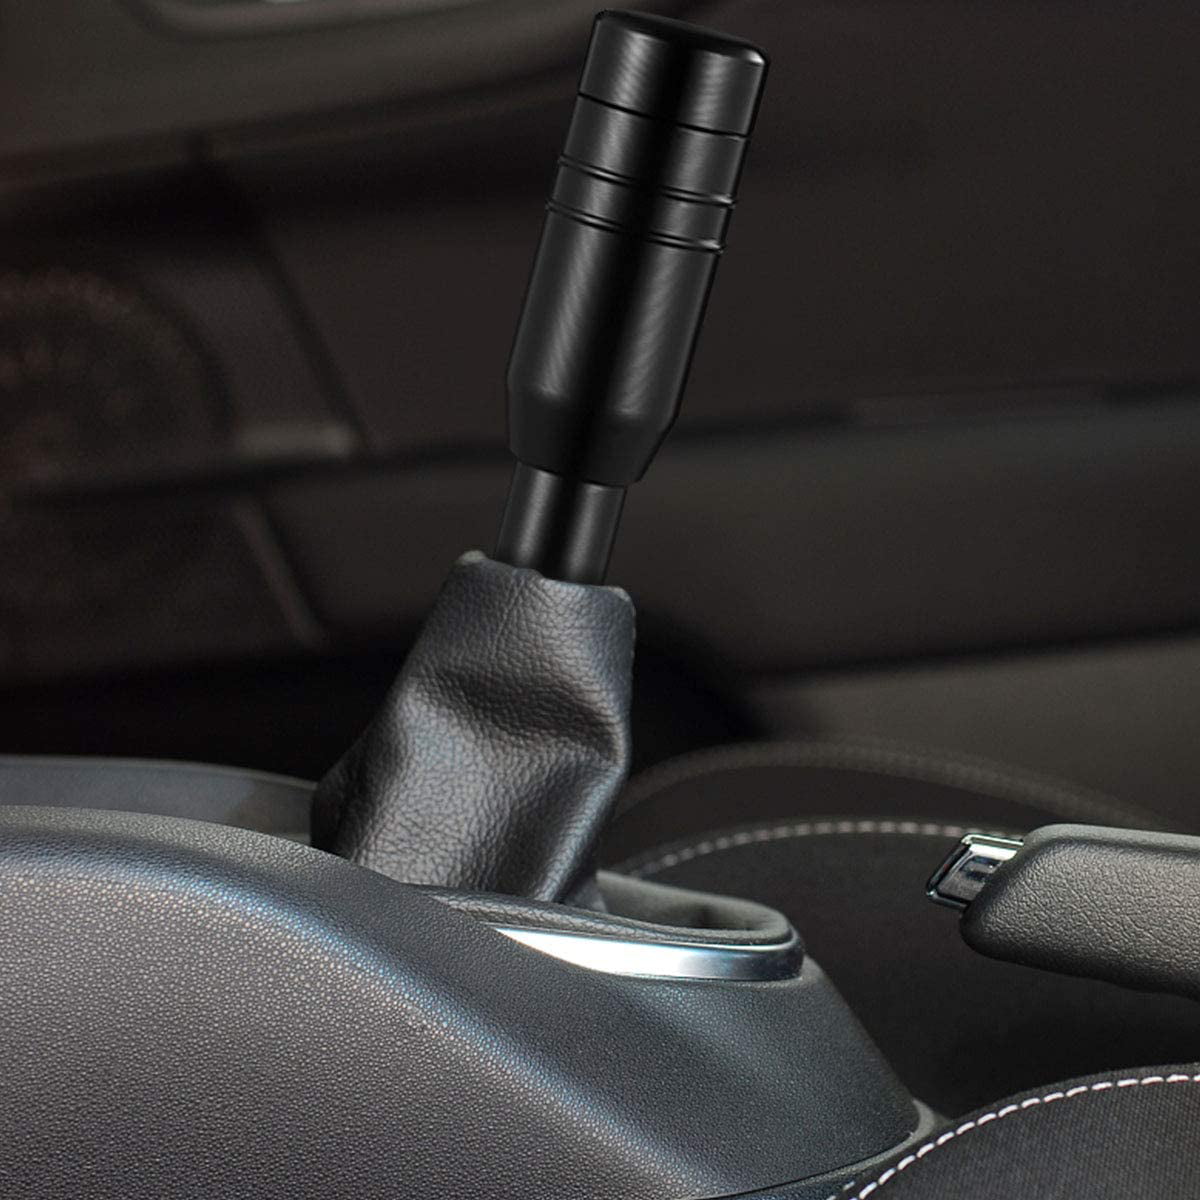 Abfer Shift Knobs Universal Gear Stick Shift Shifter Knob For Most Manual or Automatic Transmission Cars Black 